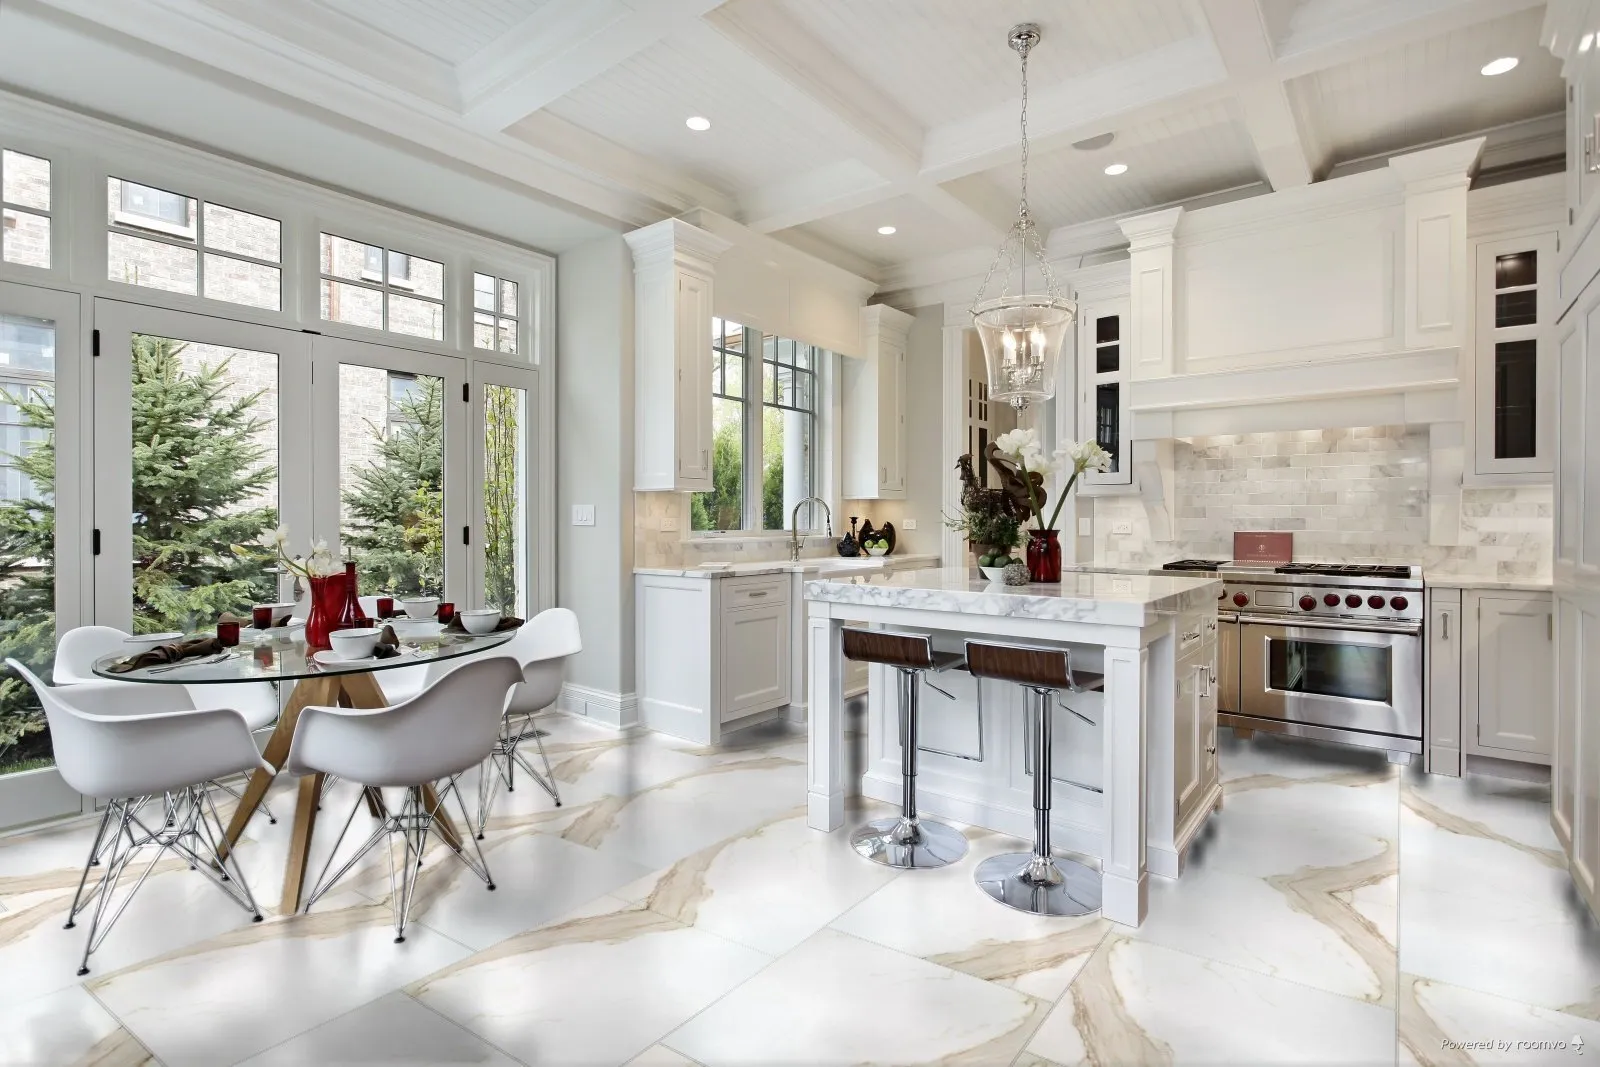 The 7 Best Flooring Options for Kitchens (2023)